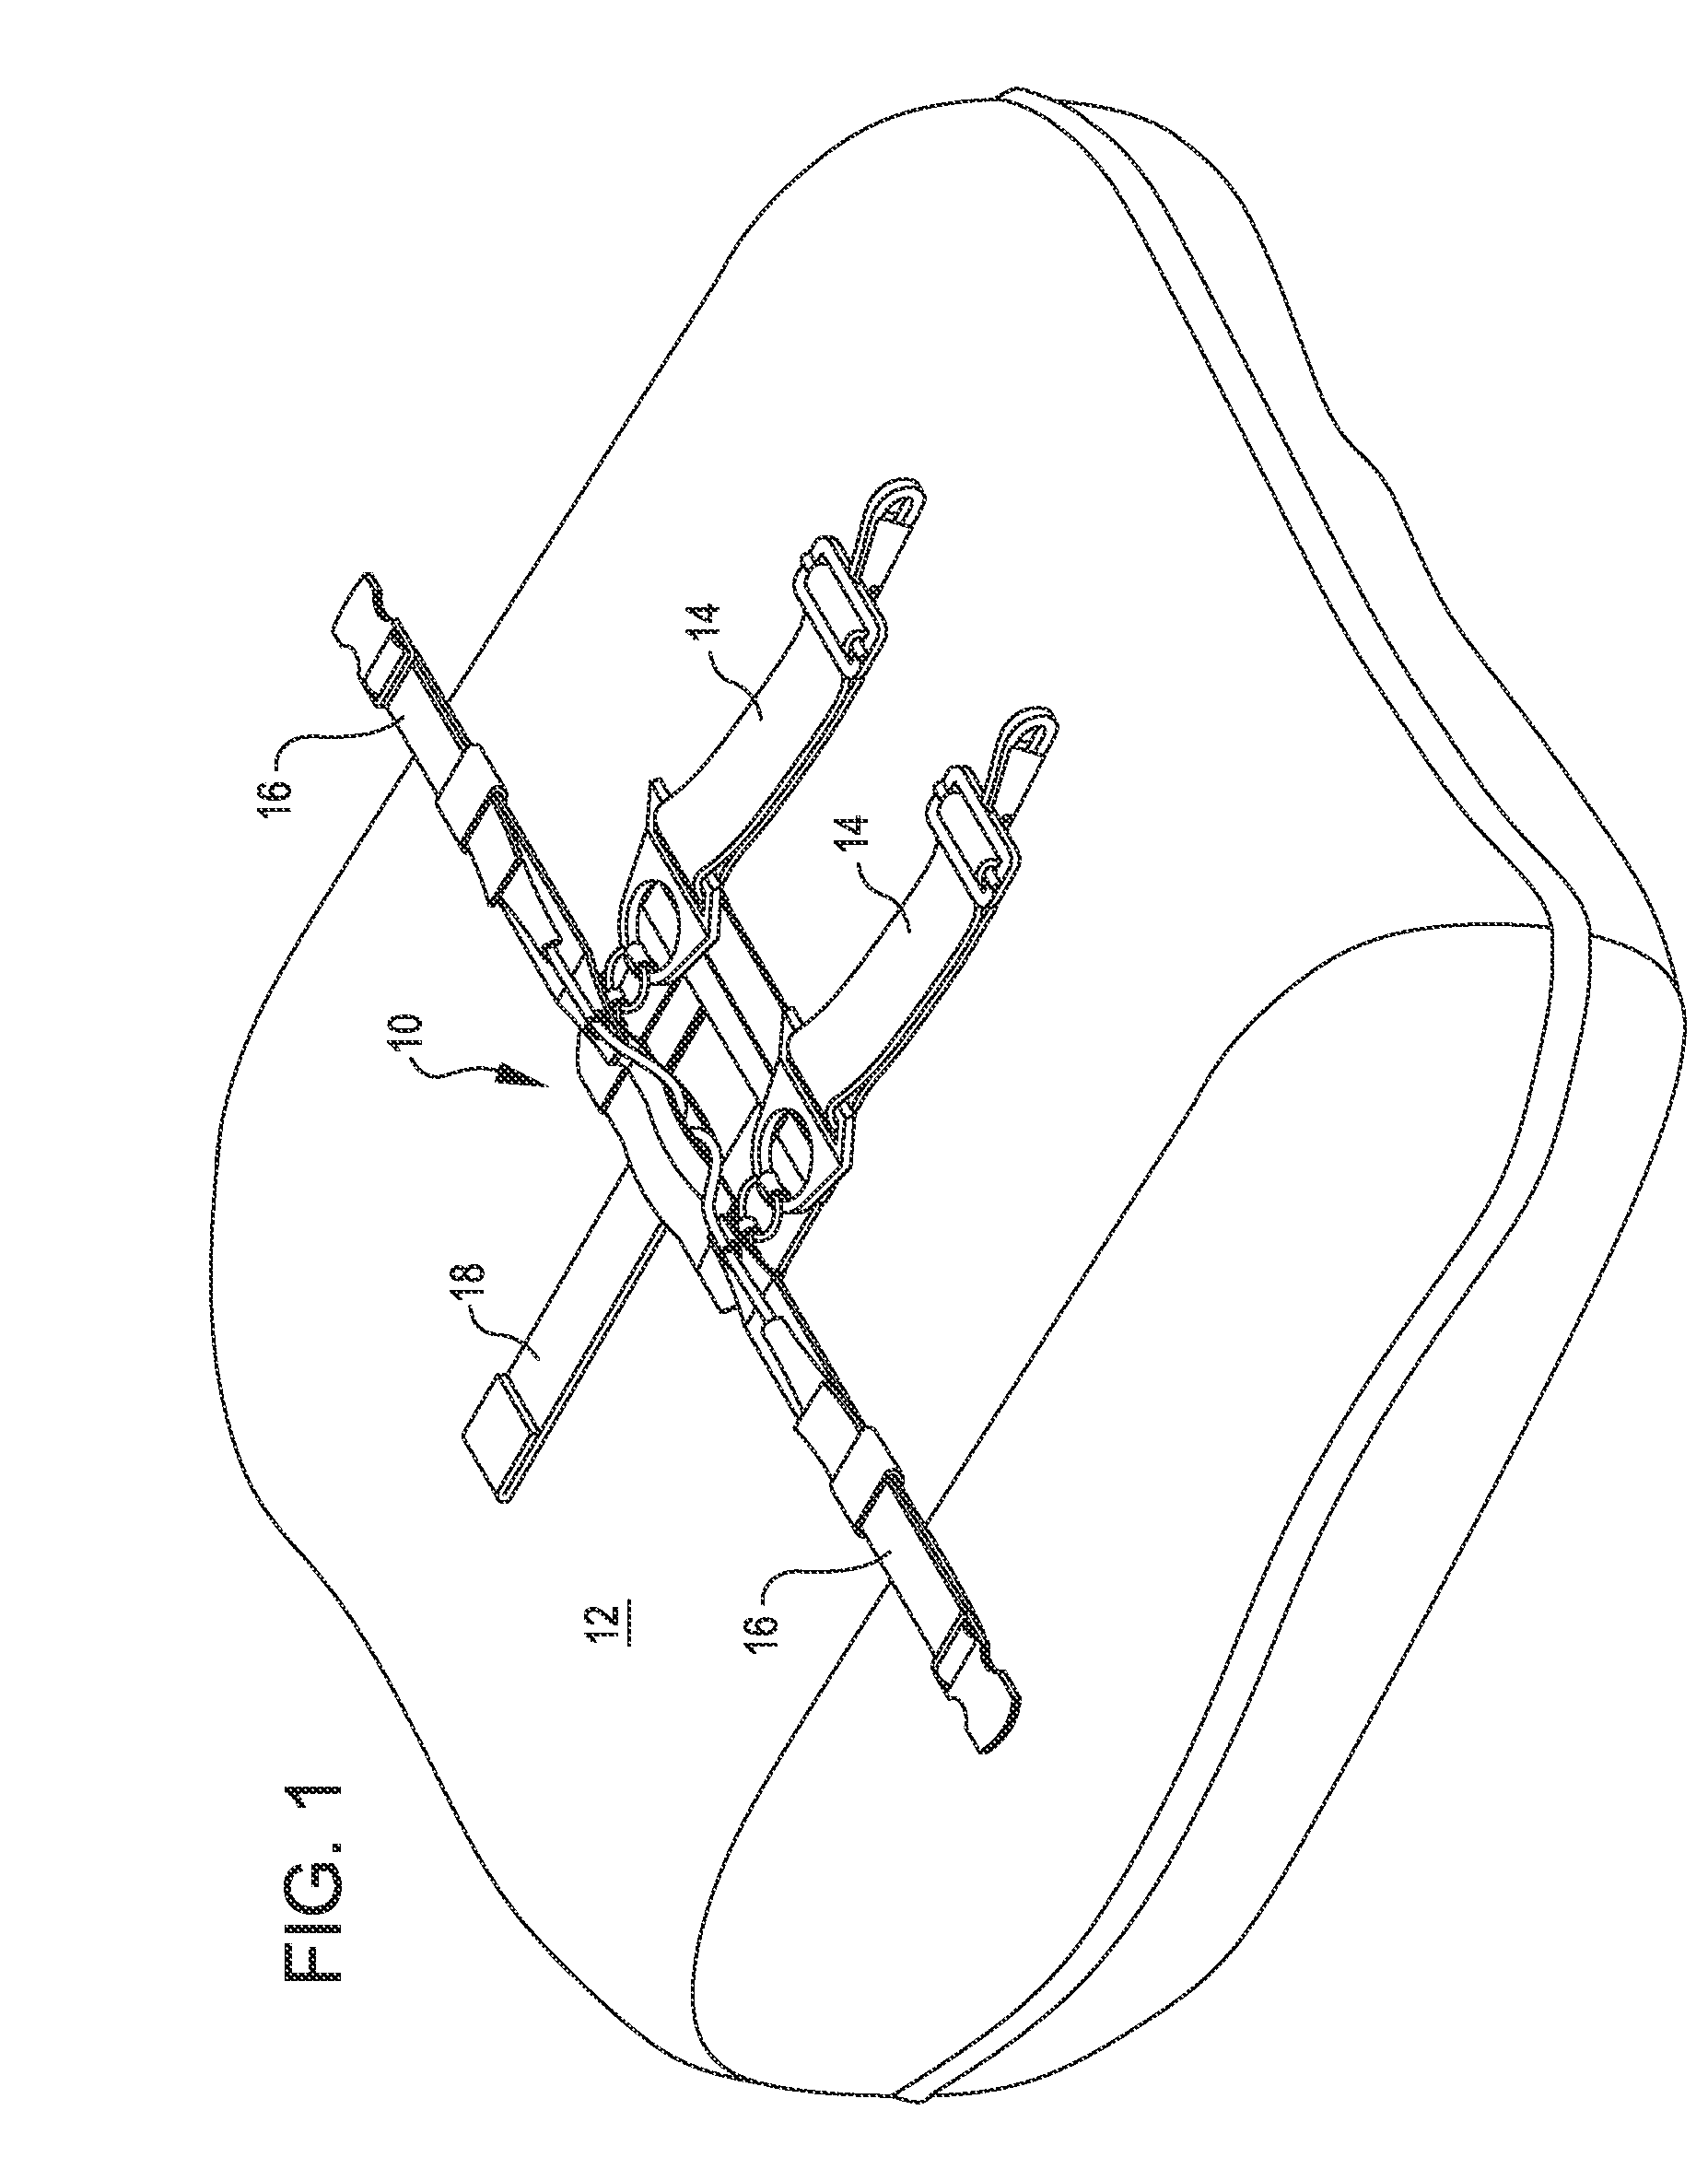 Releasable pack for parachuting when carrying equipment